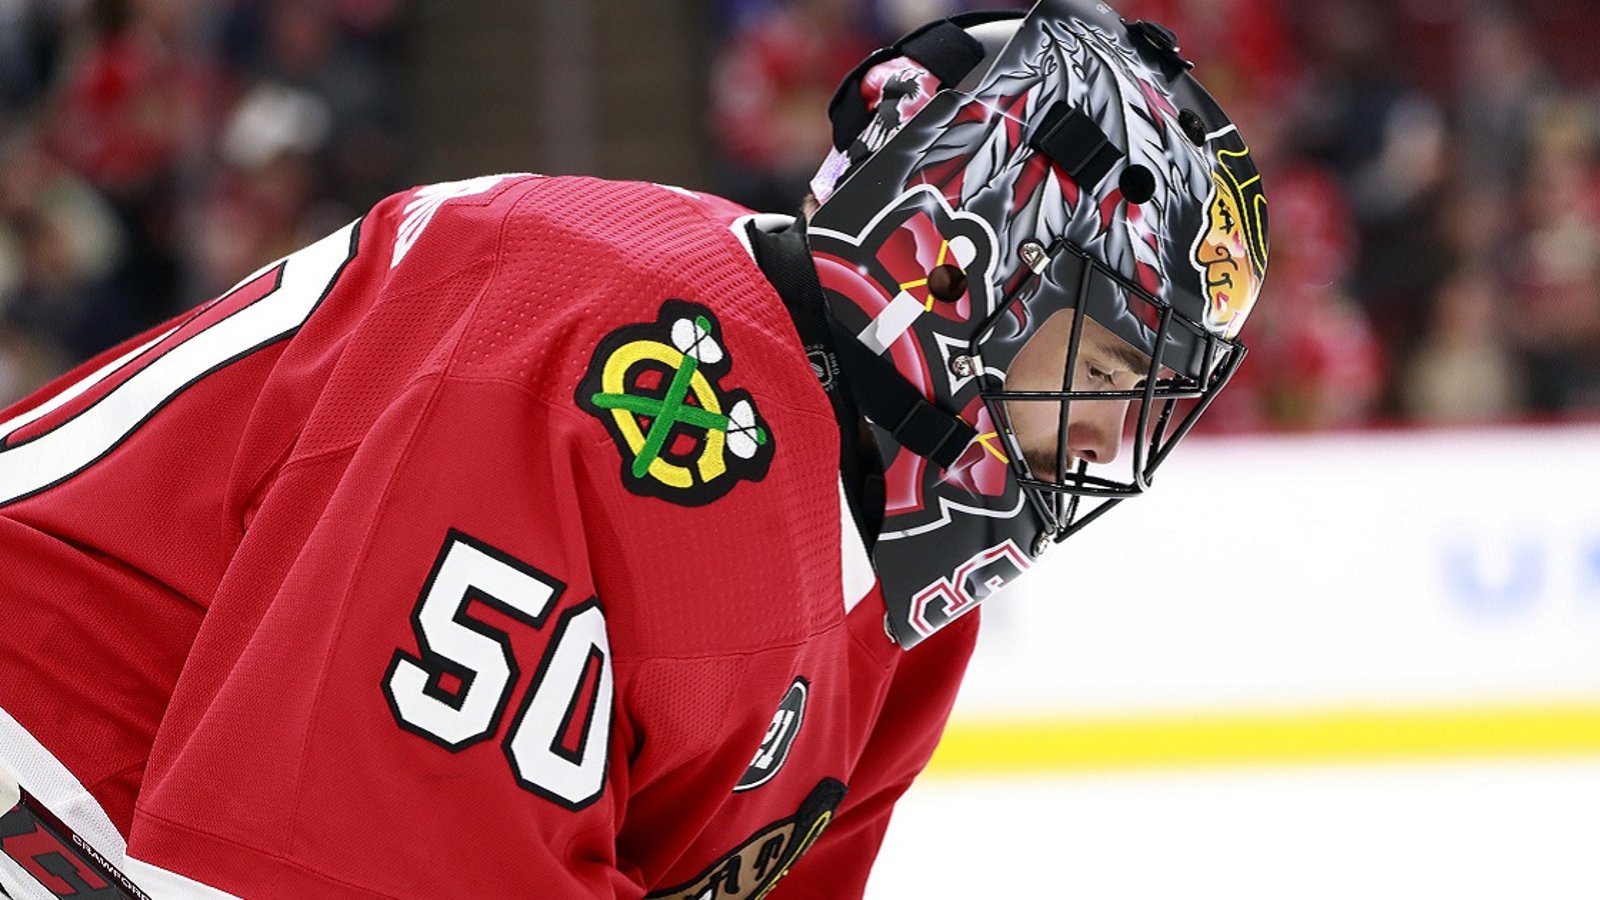 Corey Crawford expresses disappointment with the Blackhawks.